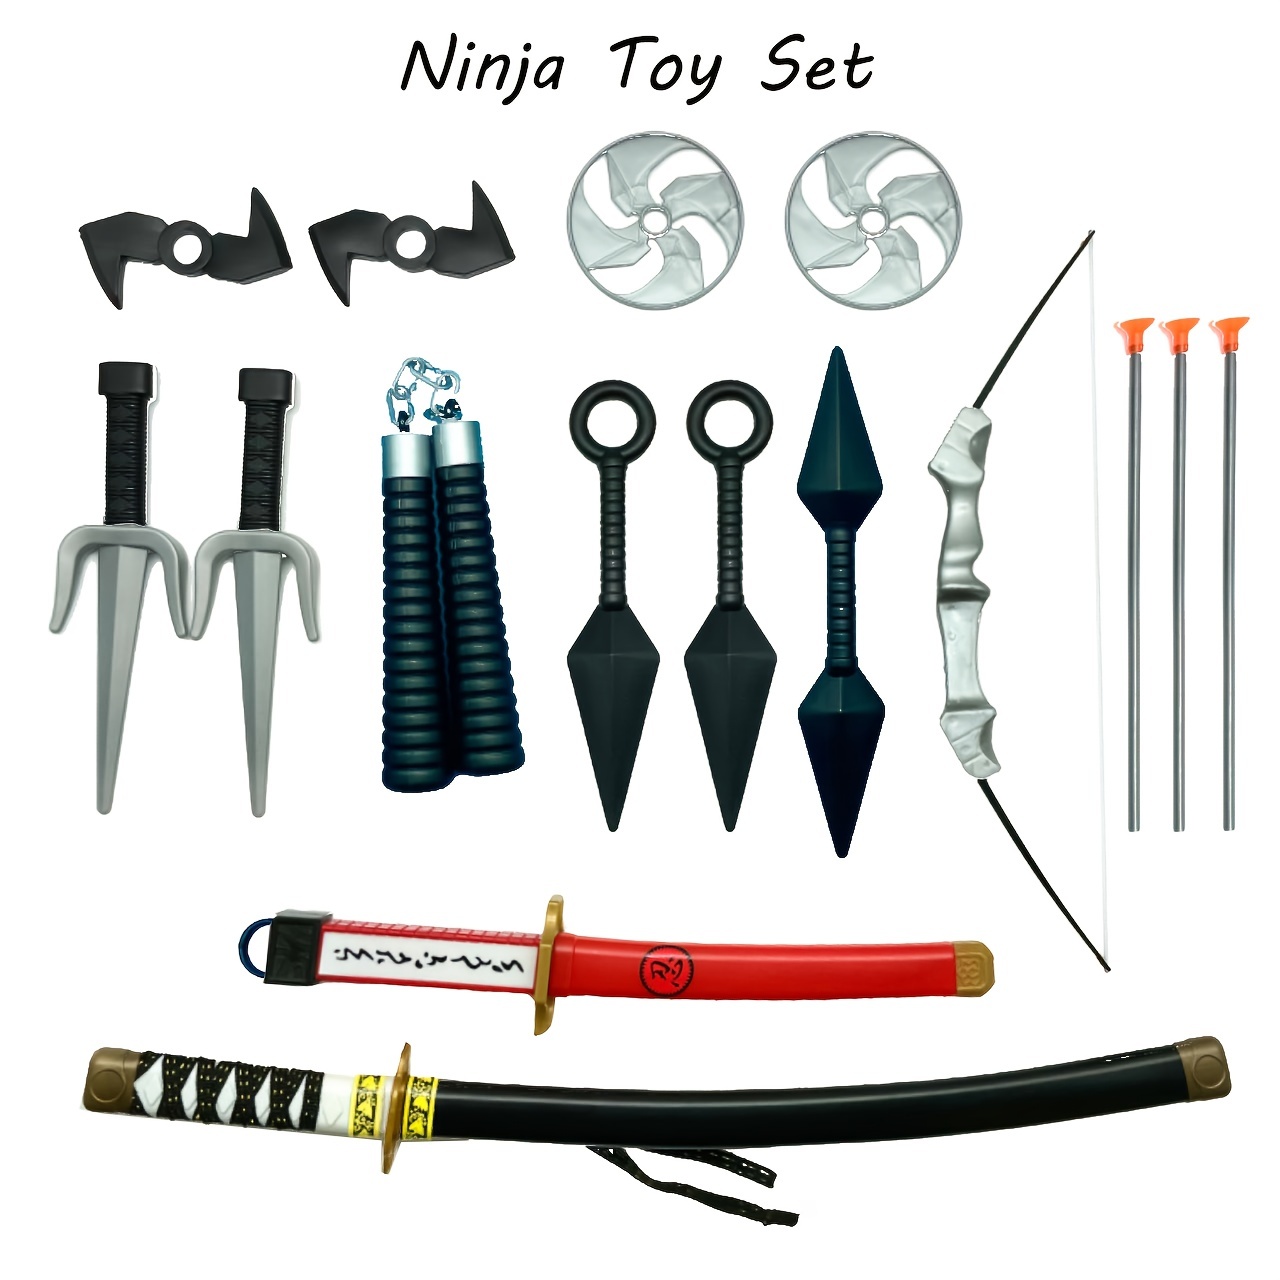 Ninja/Knight Set For Kids, Helmet, Chest Piece, Shield, Sword, Bow And  Arrow Archery Set, Toy Weapons For Kids Pretend Role Play, Cosplay, Costume  Acc